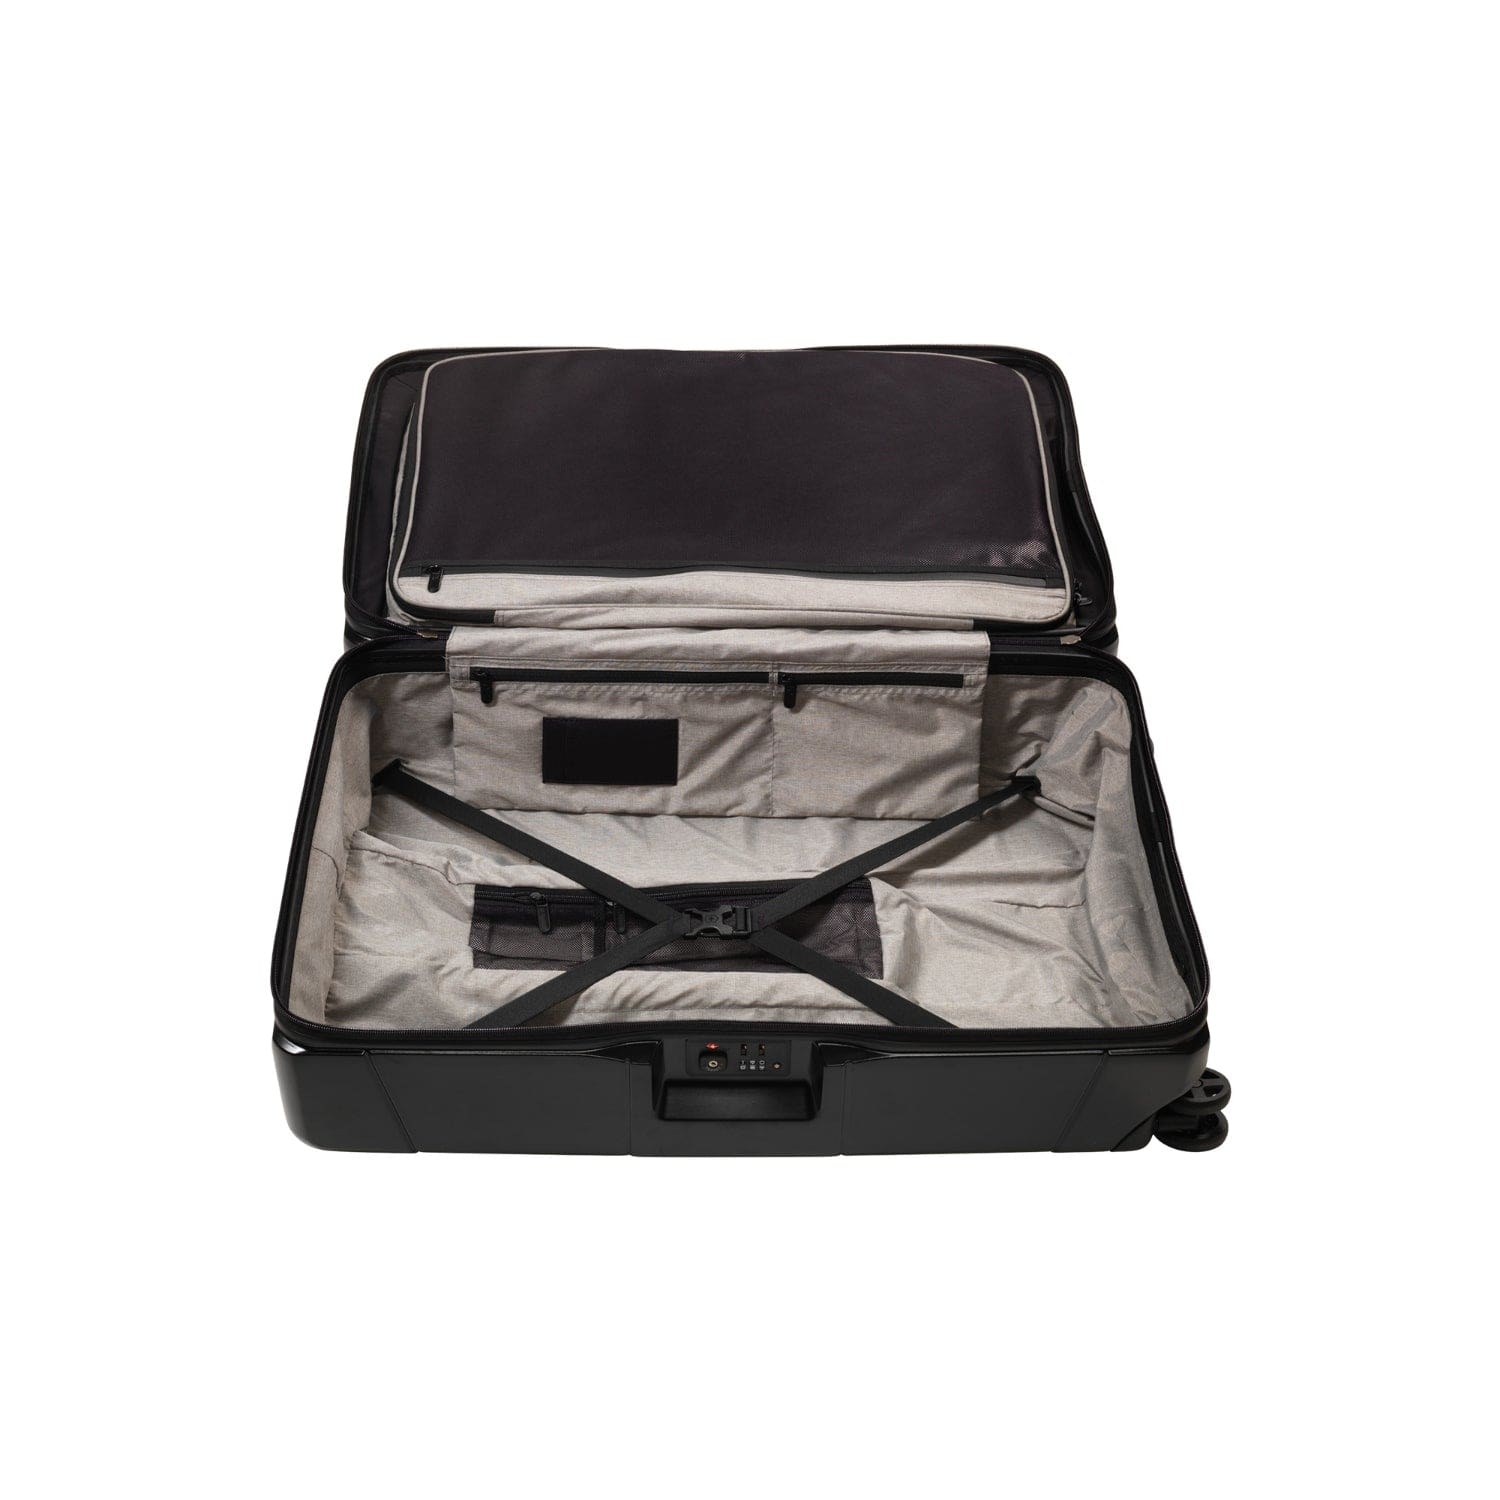 Victorinox Lexicon 75cm Large Hardcase 4 Double Wheel Check-In Luggage Trolley Case Black - 602107